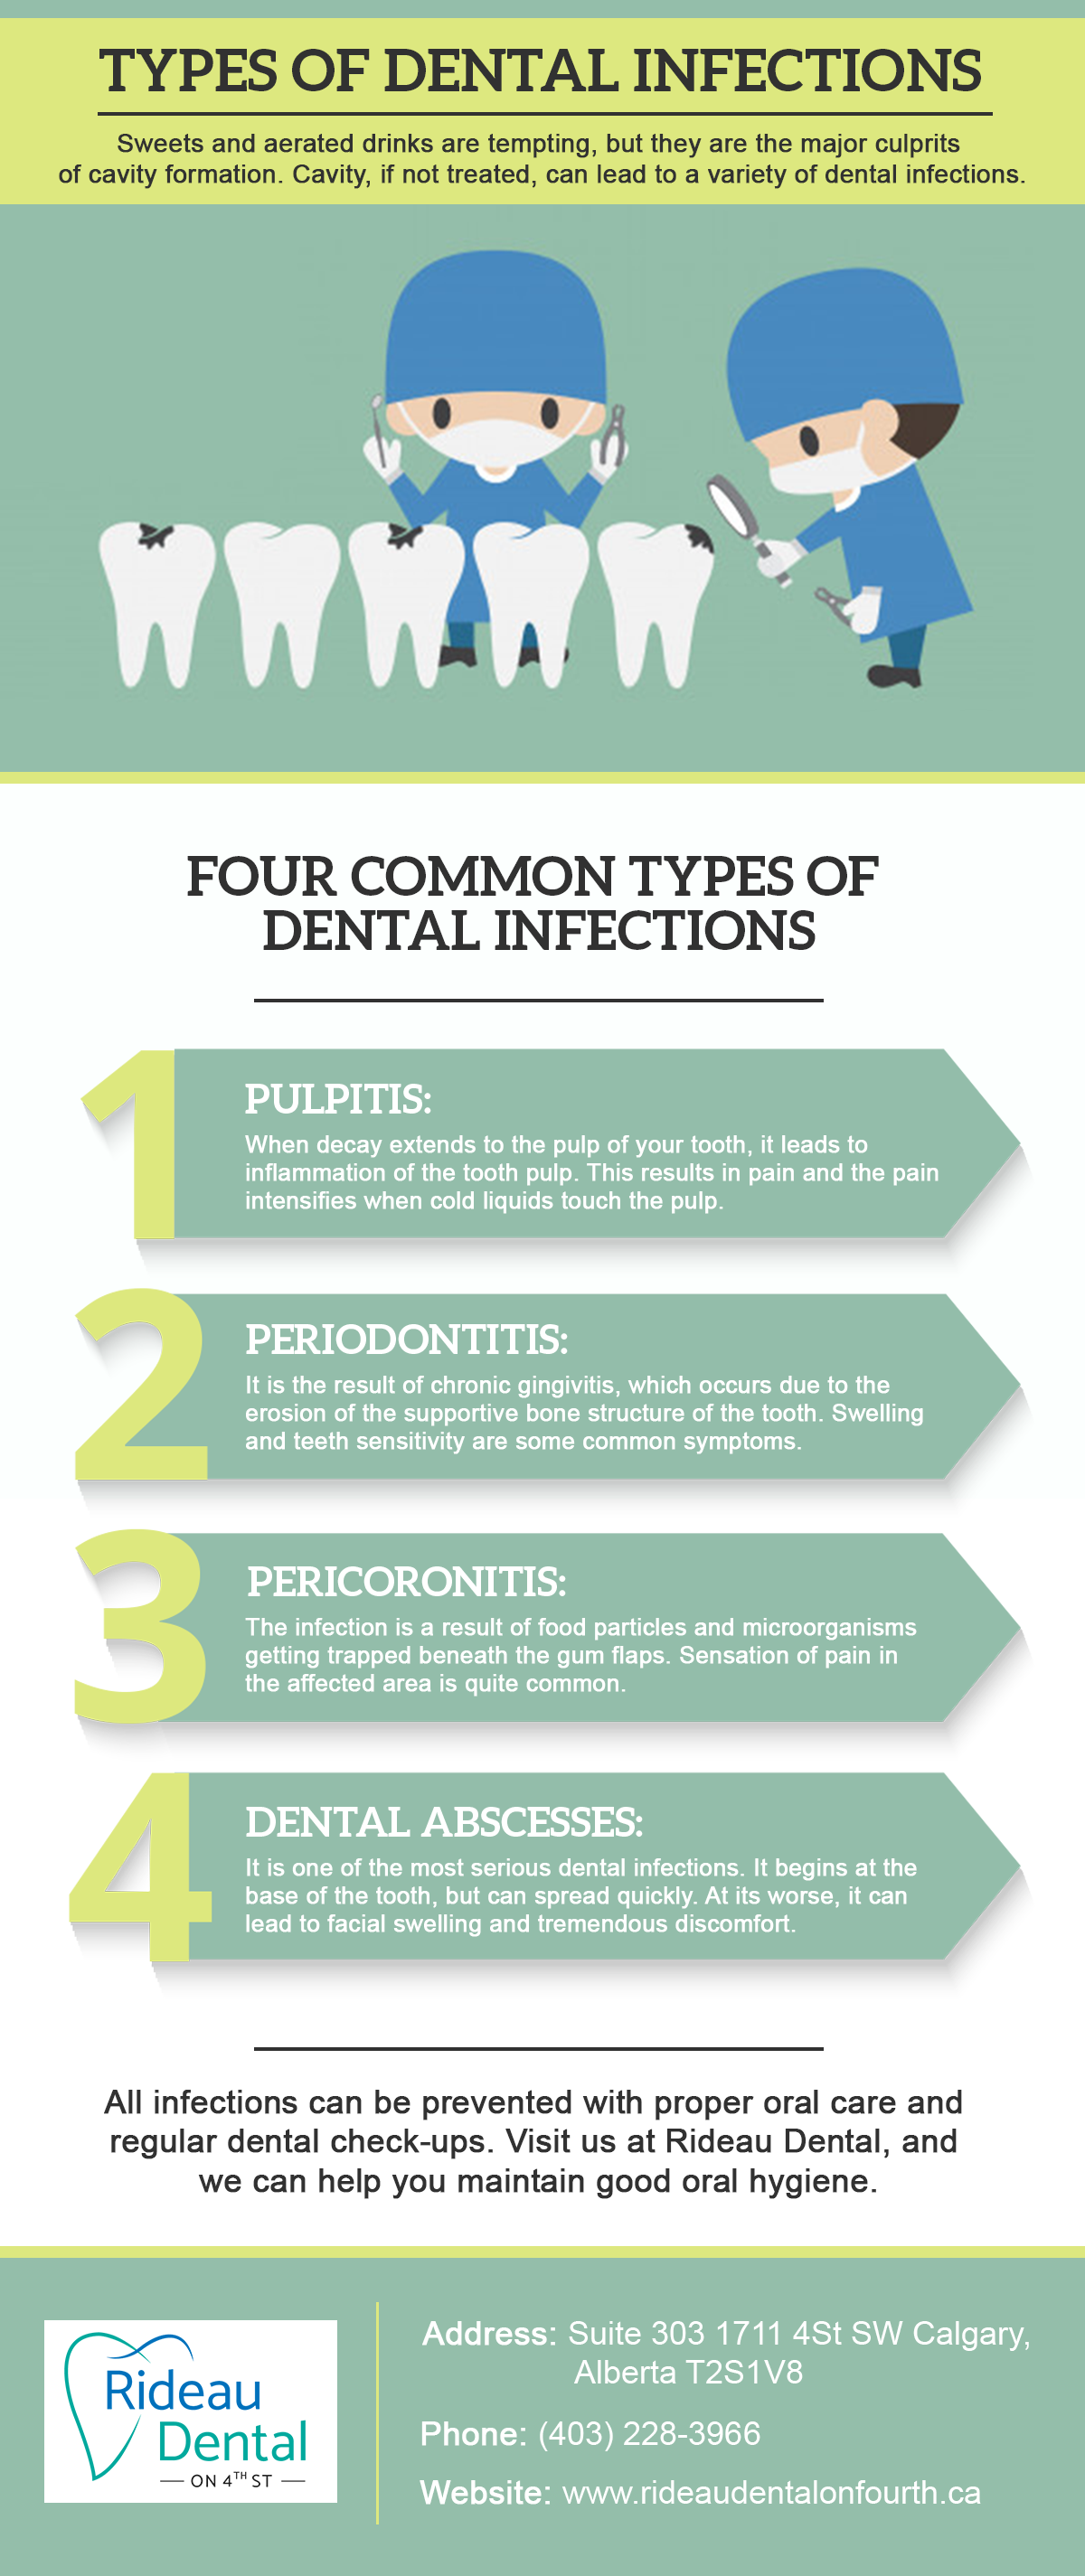 Types of Dental Infections